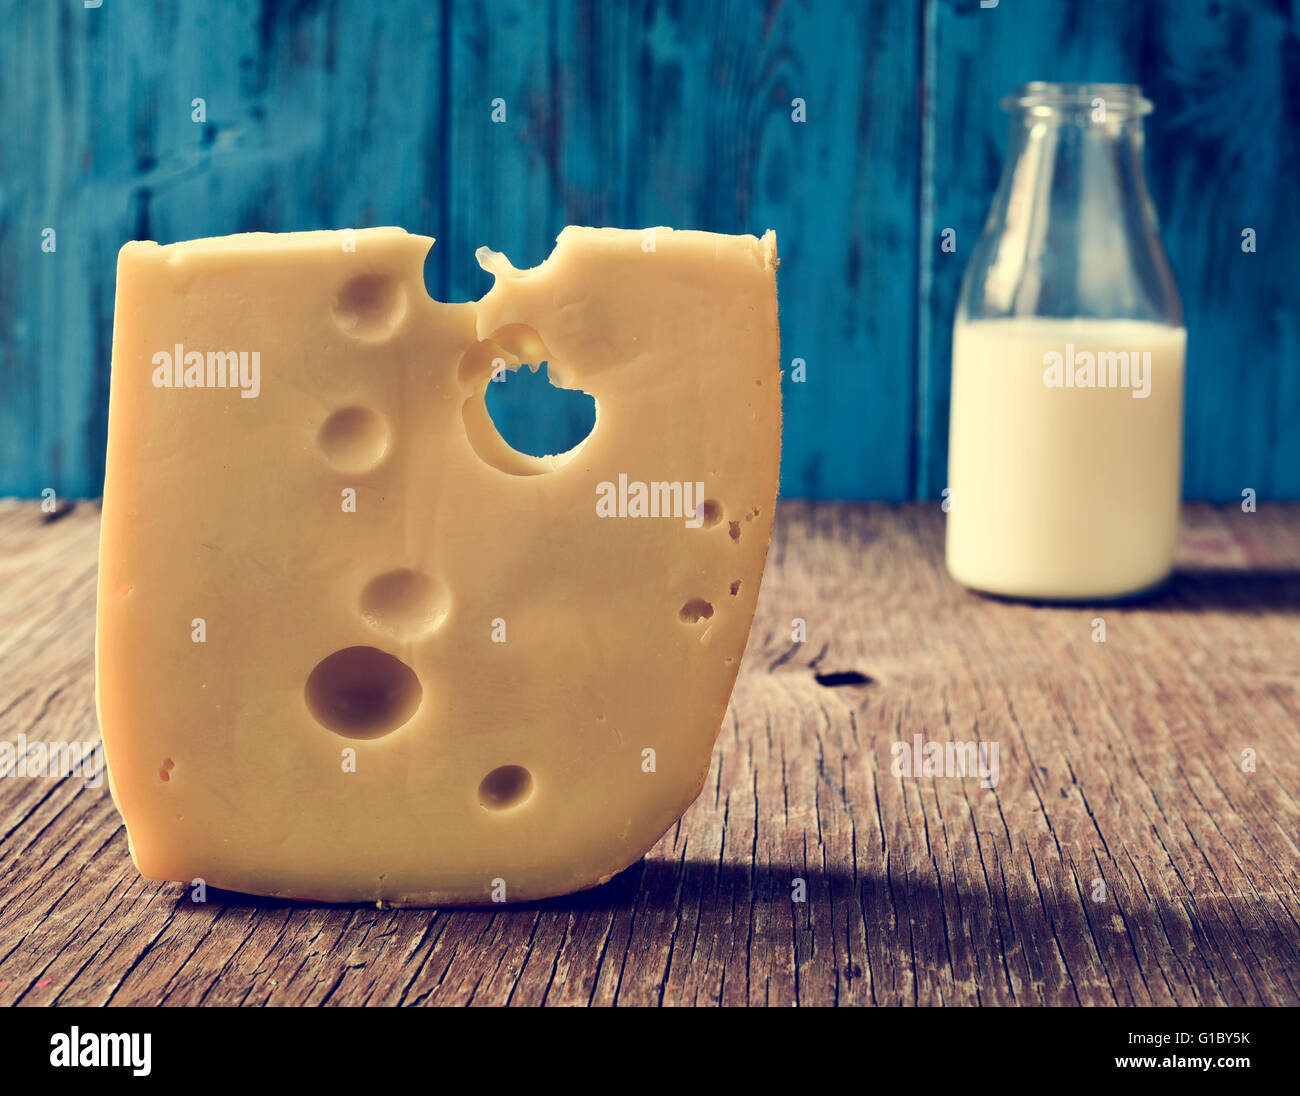 closeup of a piece of Swiss cheese and a glass bottle with milk on a rustic wooden table, against a blue rustic wooden backgroun Stock Photo